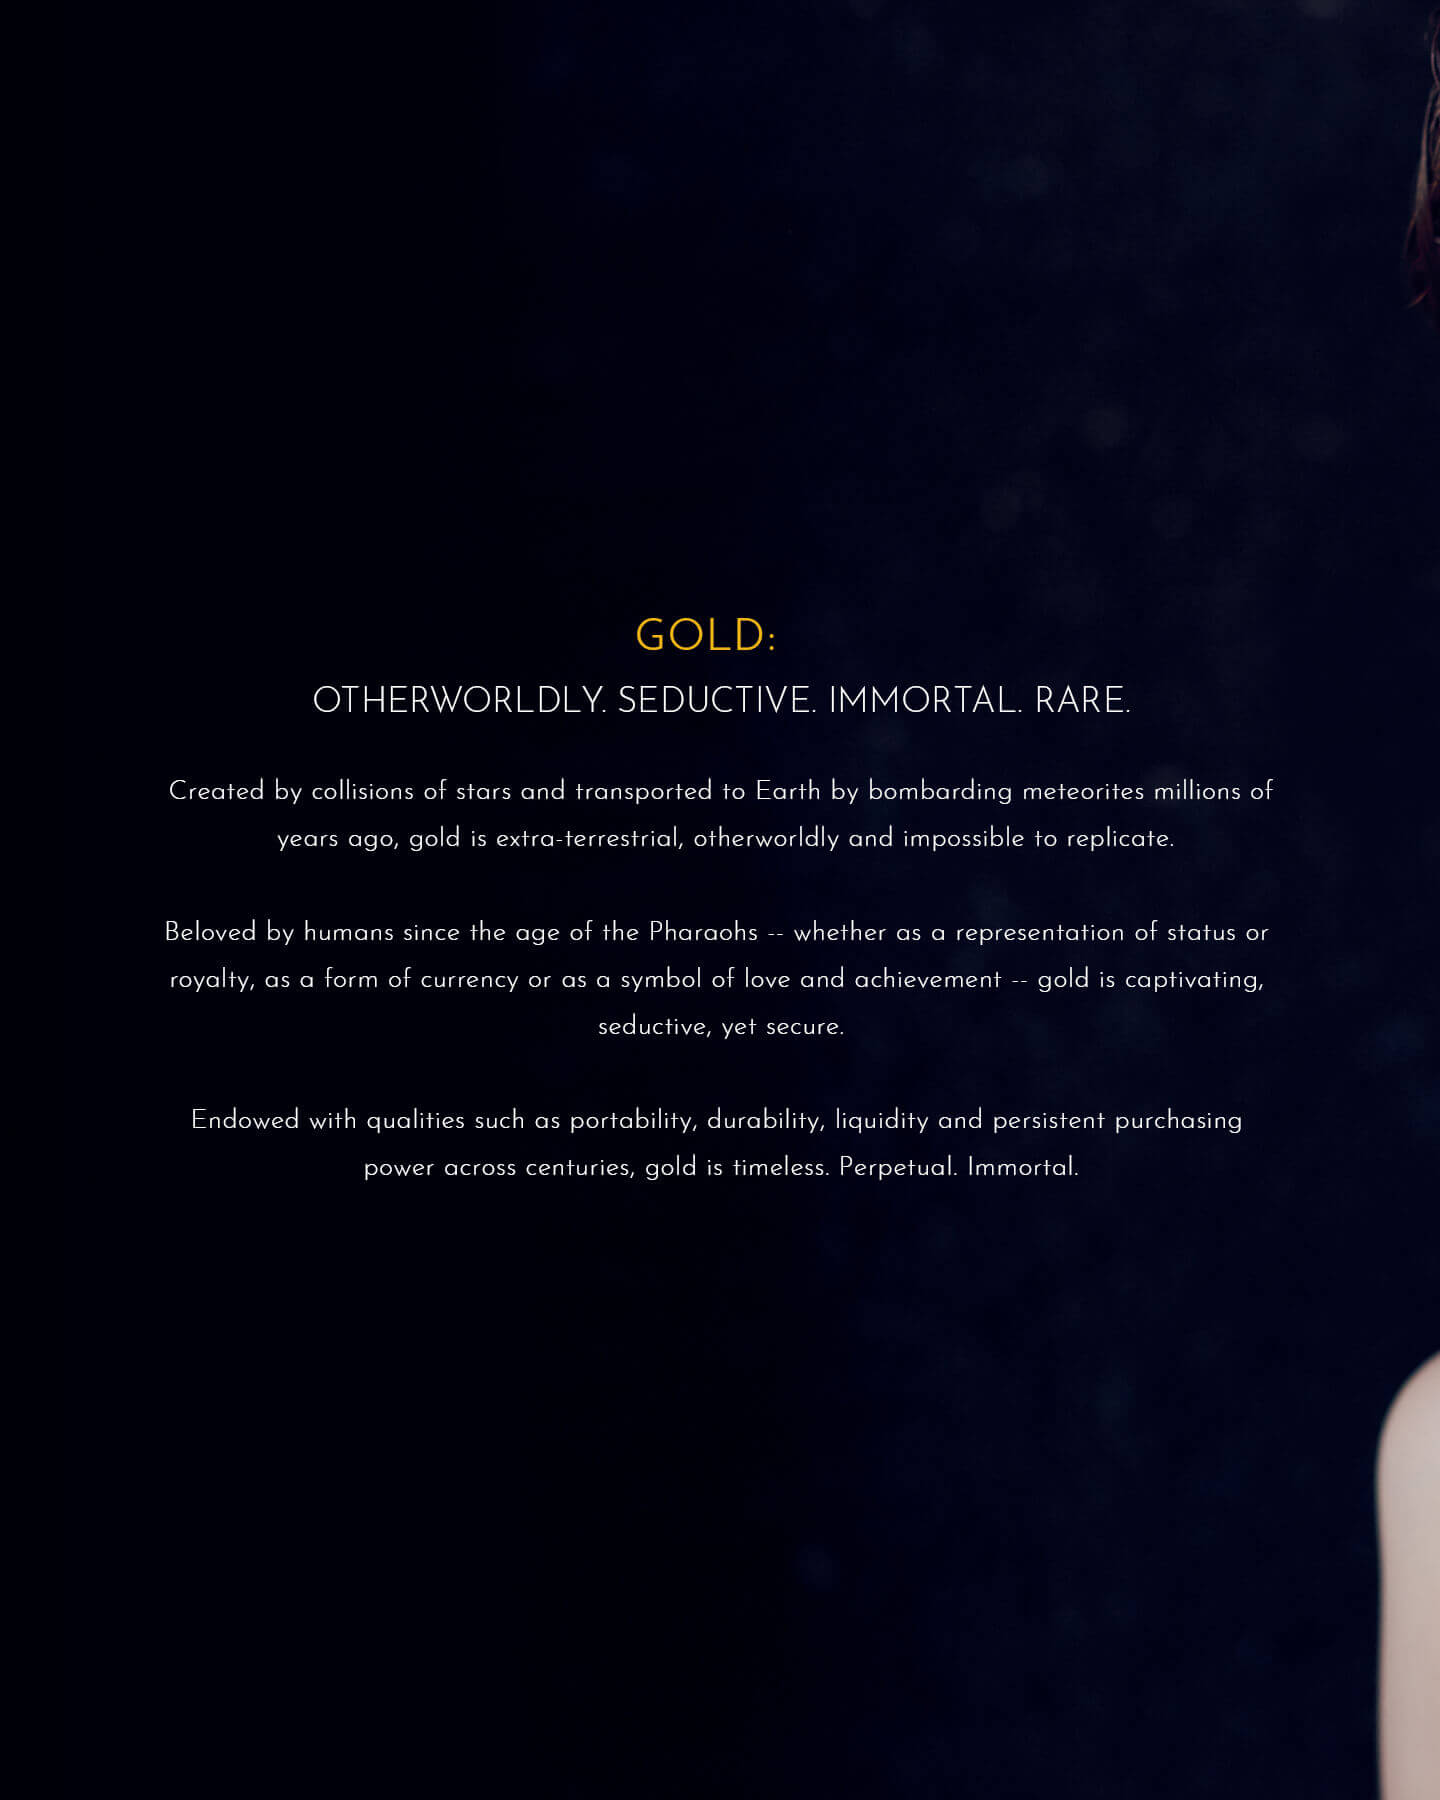 Auvere Cosmic Gold Look Book 22 and 24 karat gold jewelry